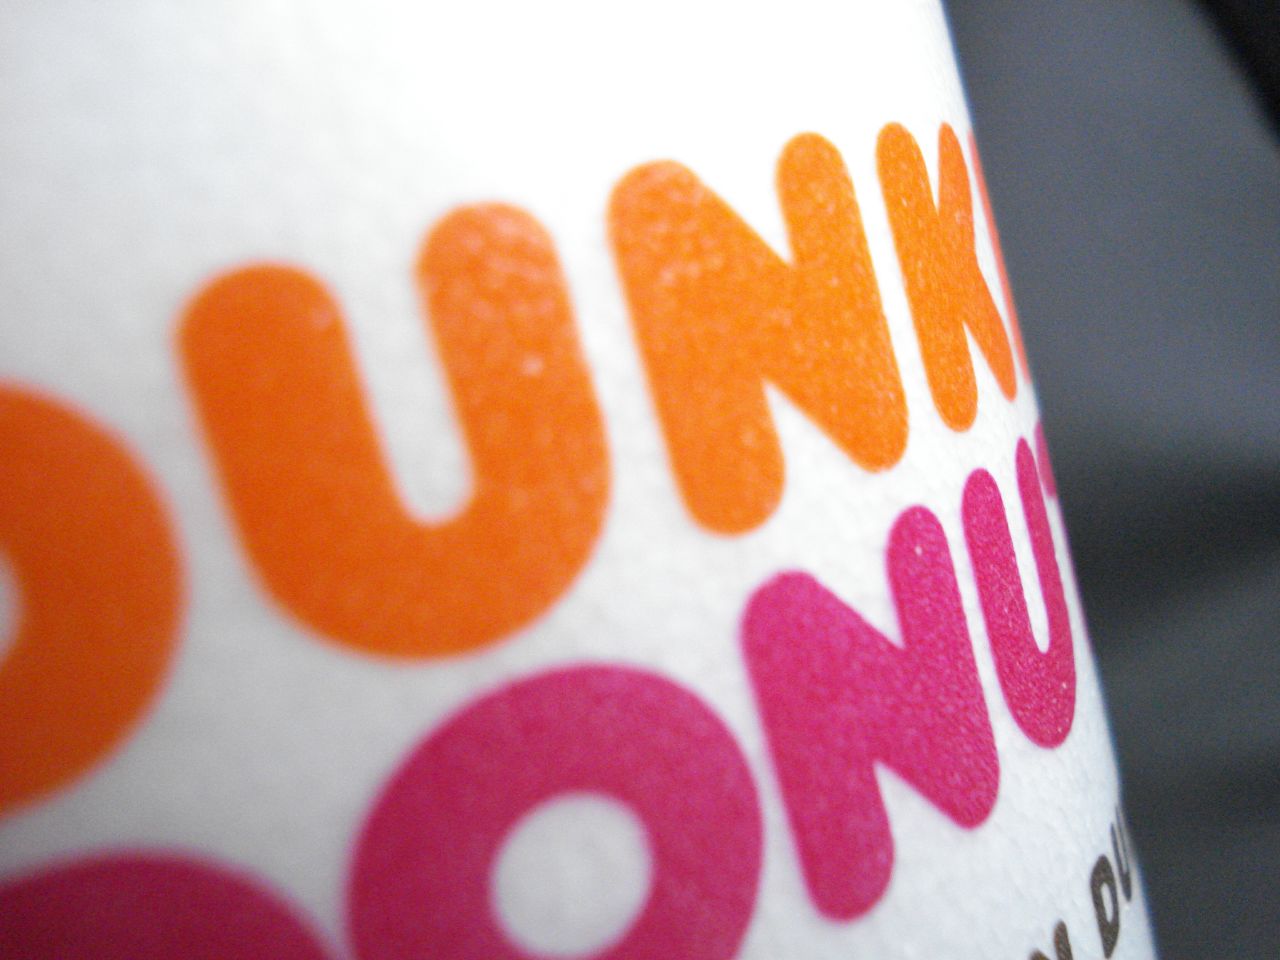 Dunkin’ Donuts Pledges To Only Serve Cage-Free Eggs In The U.S. By 2025